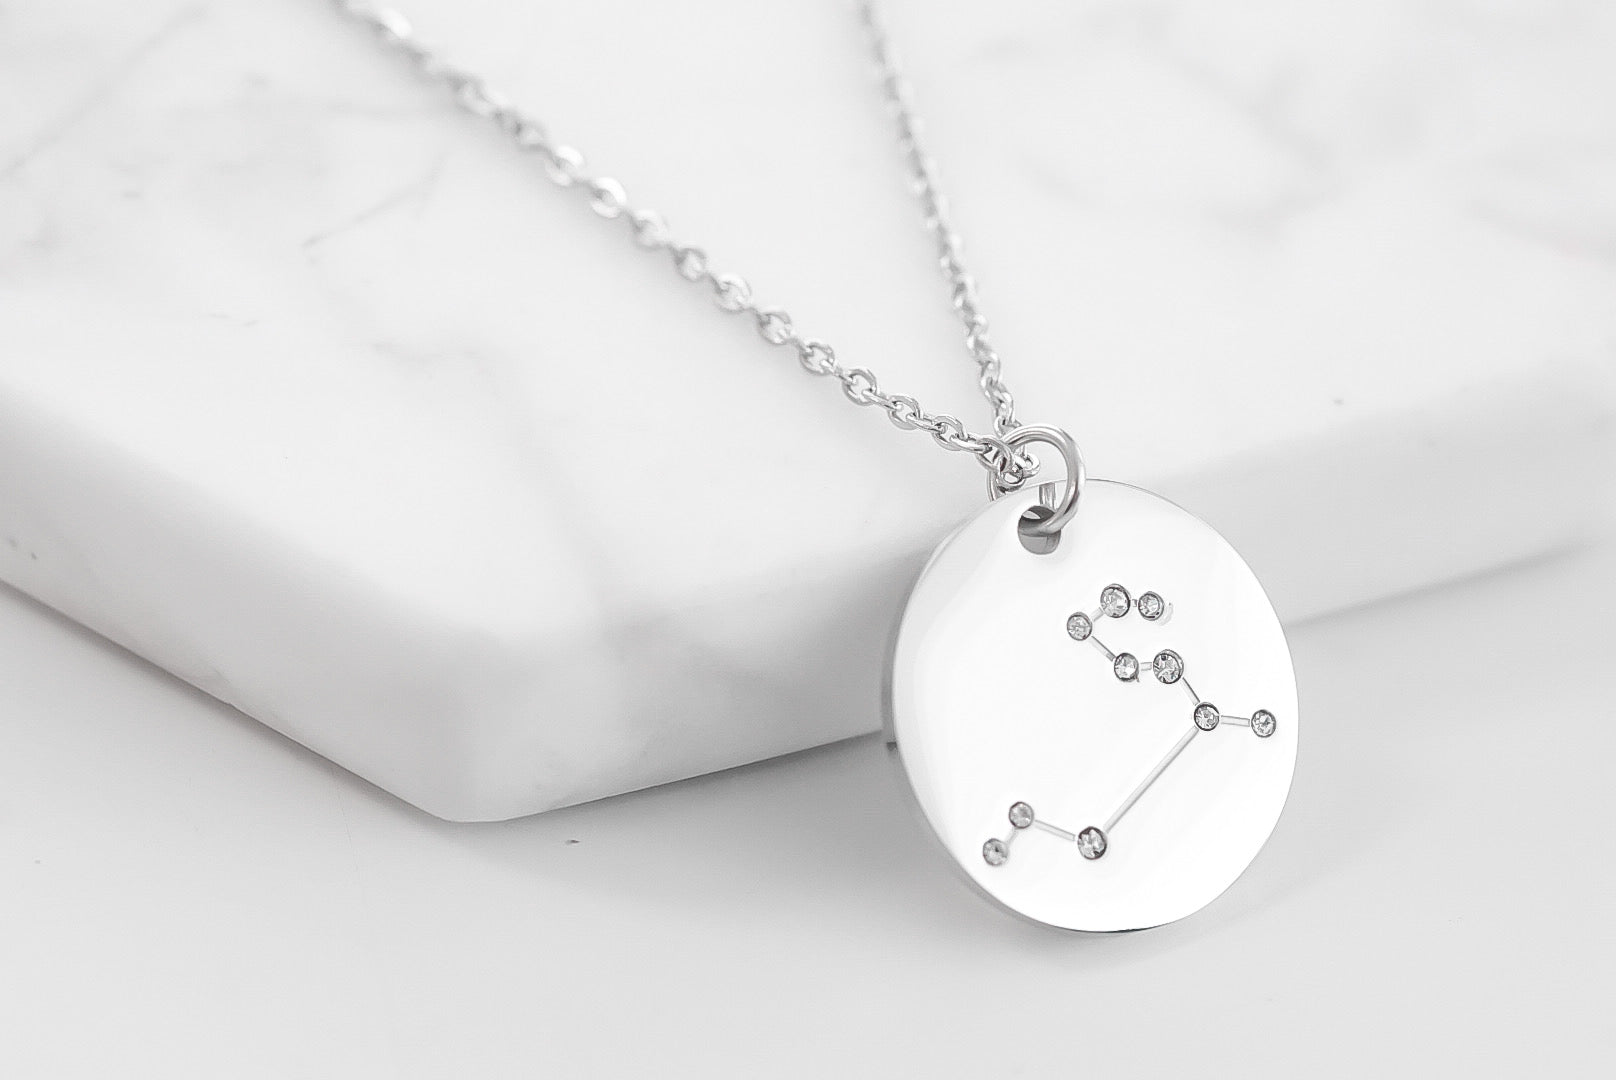 Zodiac Collection - Silver Leo Necklace (July 23 - Aug 22) fine designer jewelry for men and women